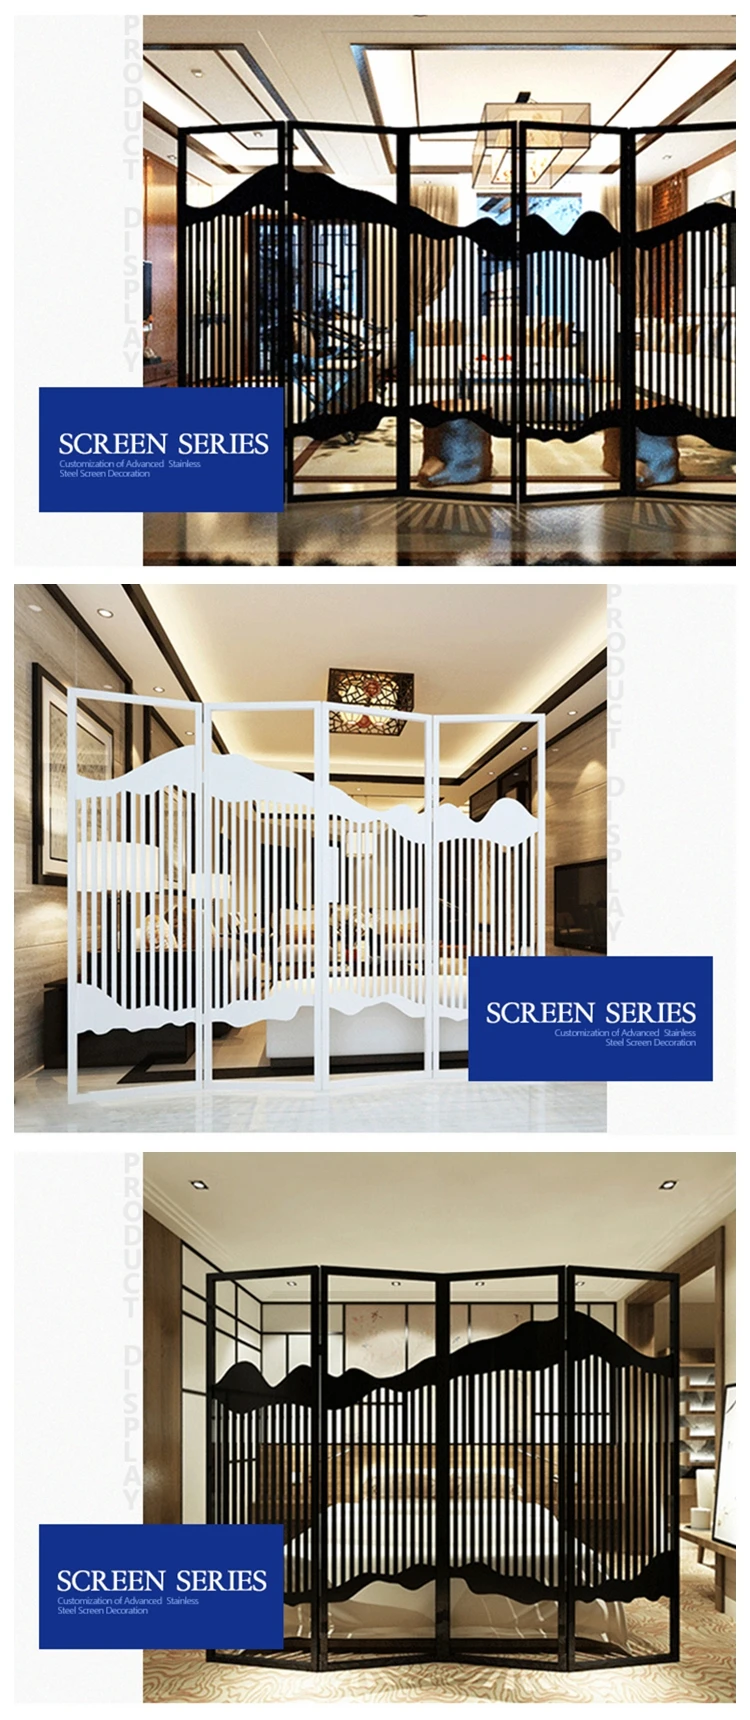 stainless steel metal decor lobby partition design removable flexible room screen divider 4 panel design room partition